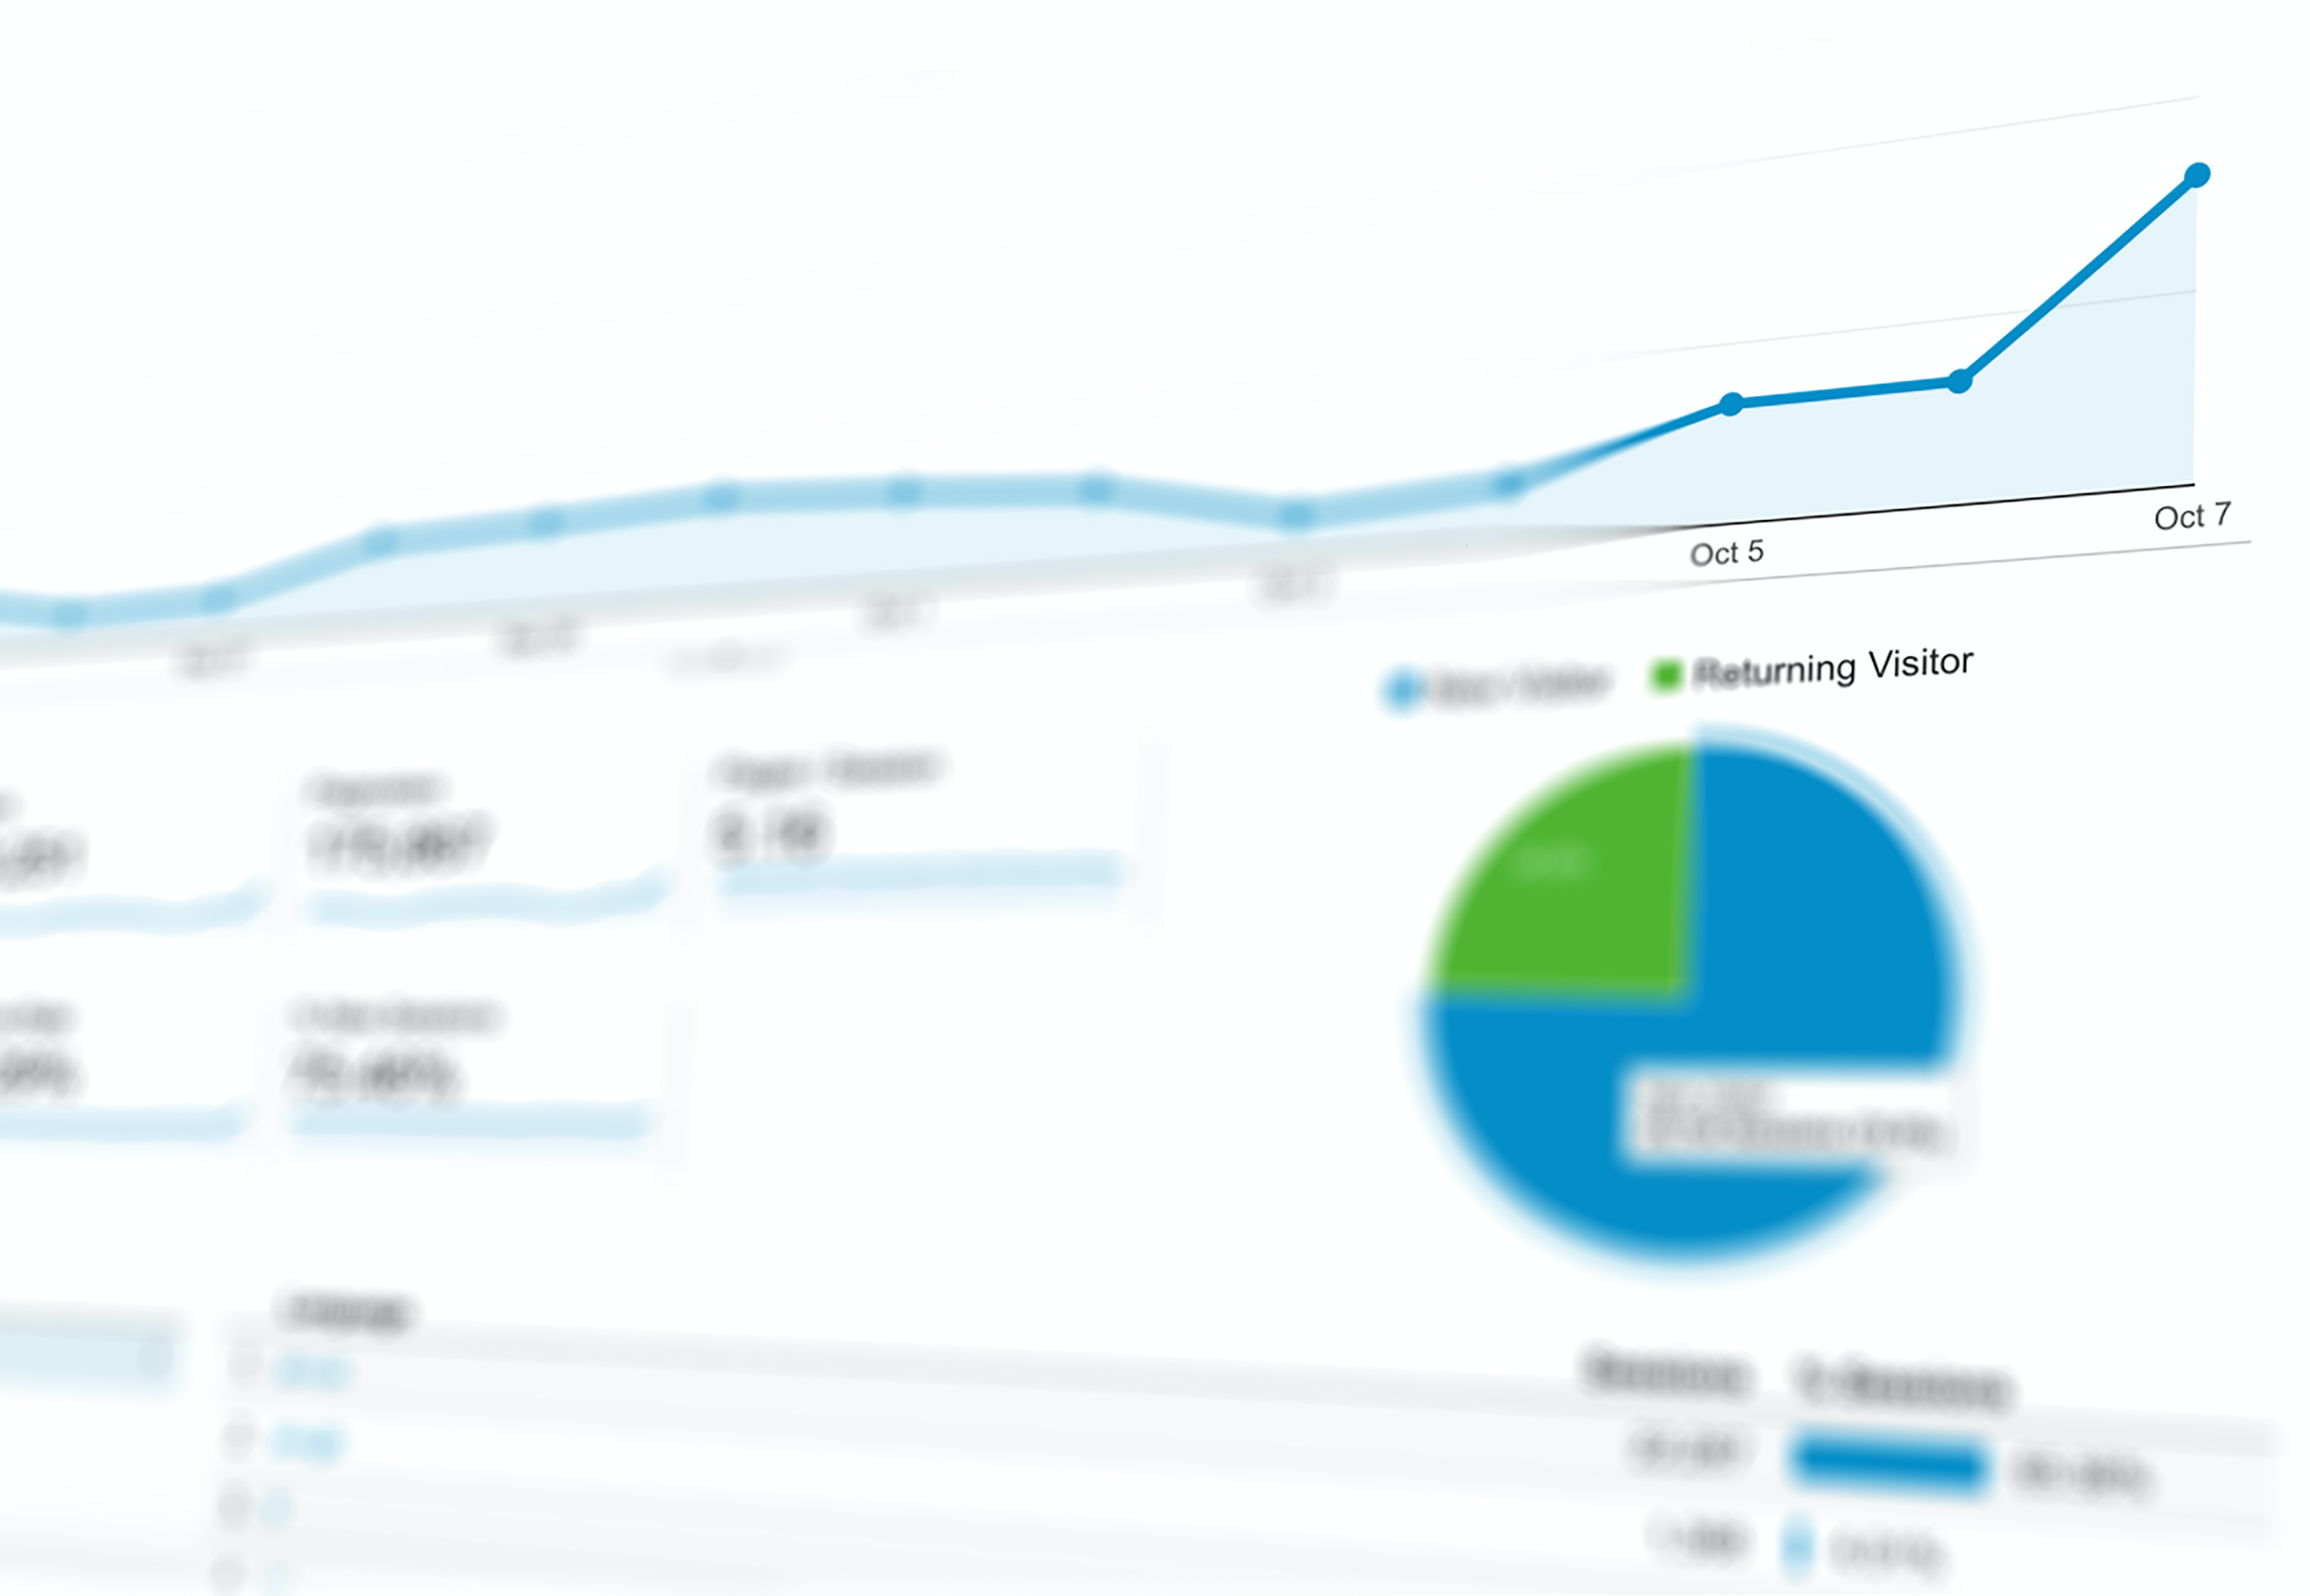 Google analytics pie chart and bar graph showing growth and visitor attribution